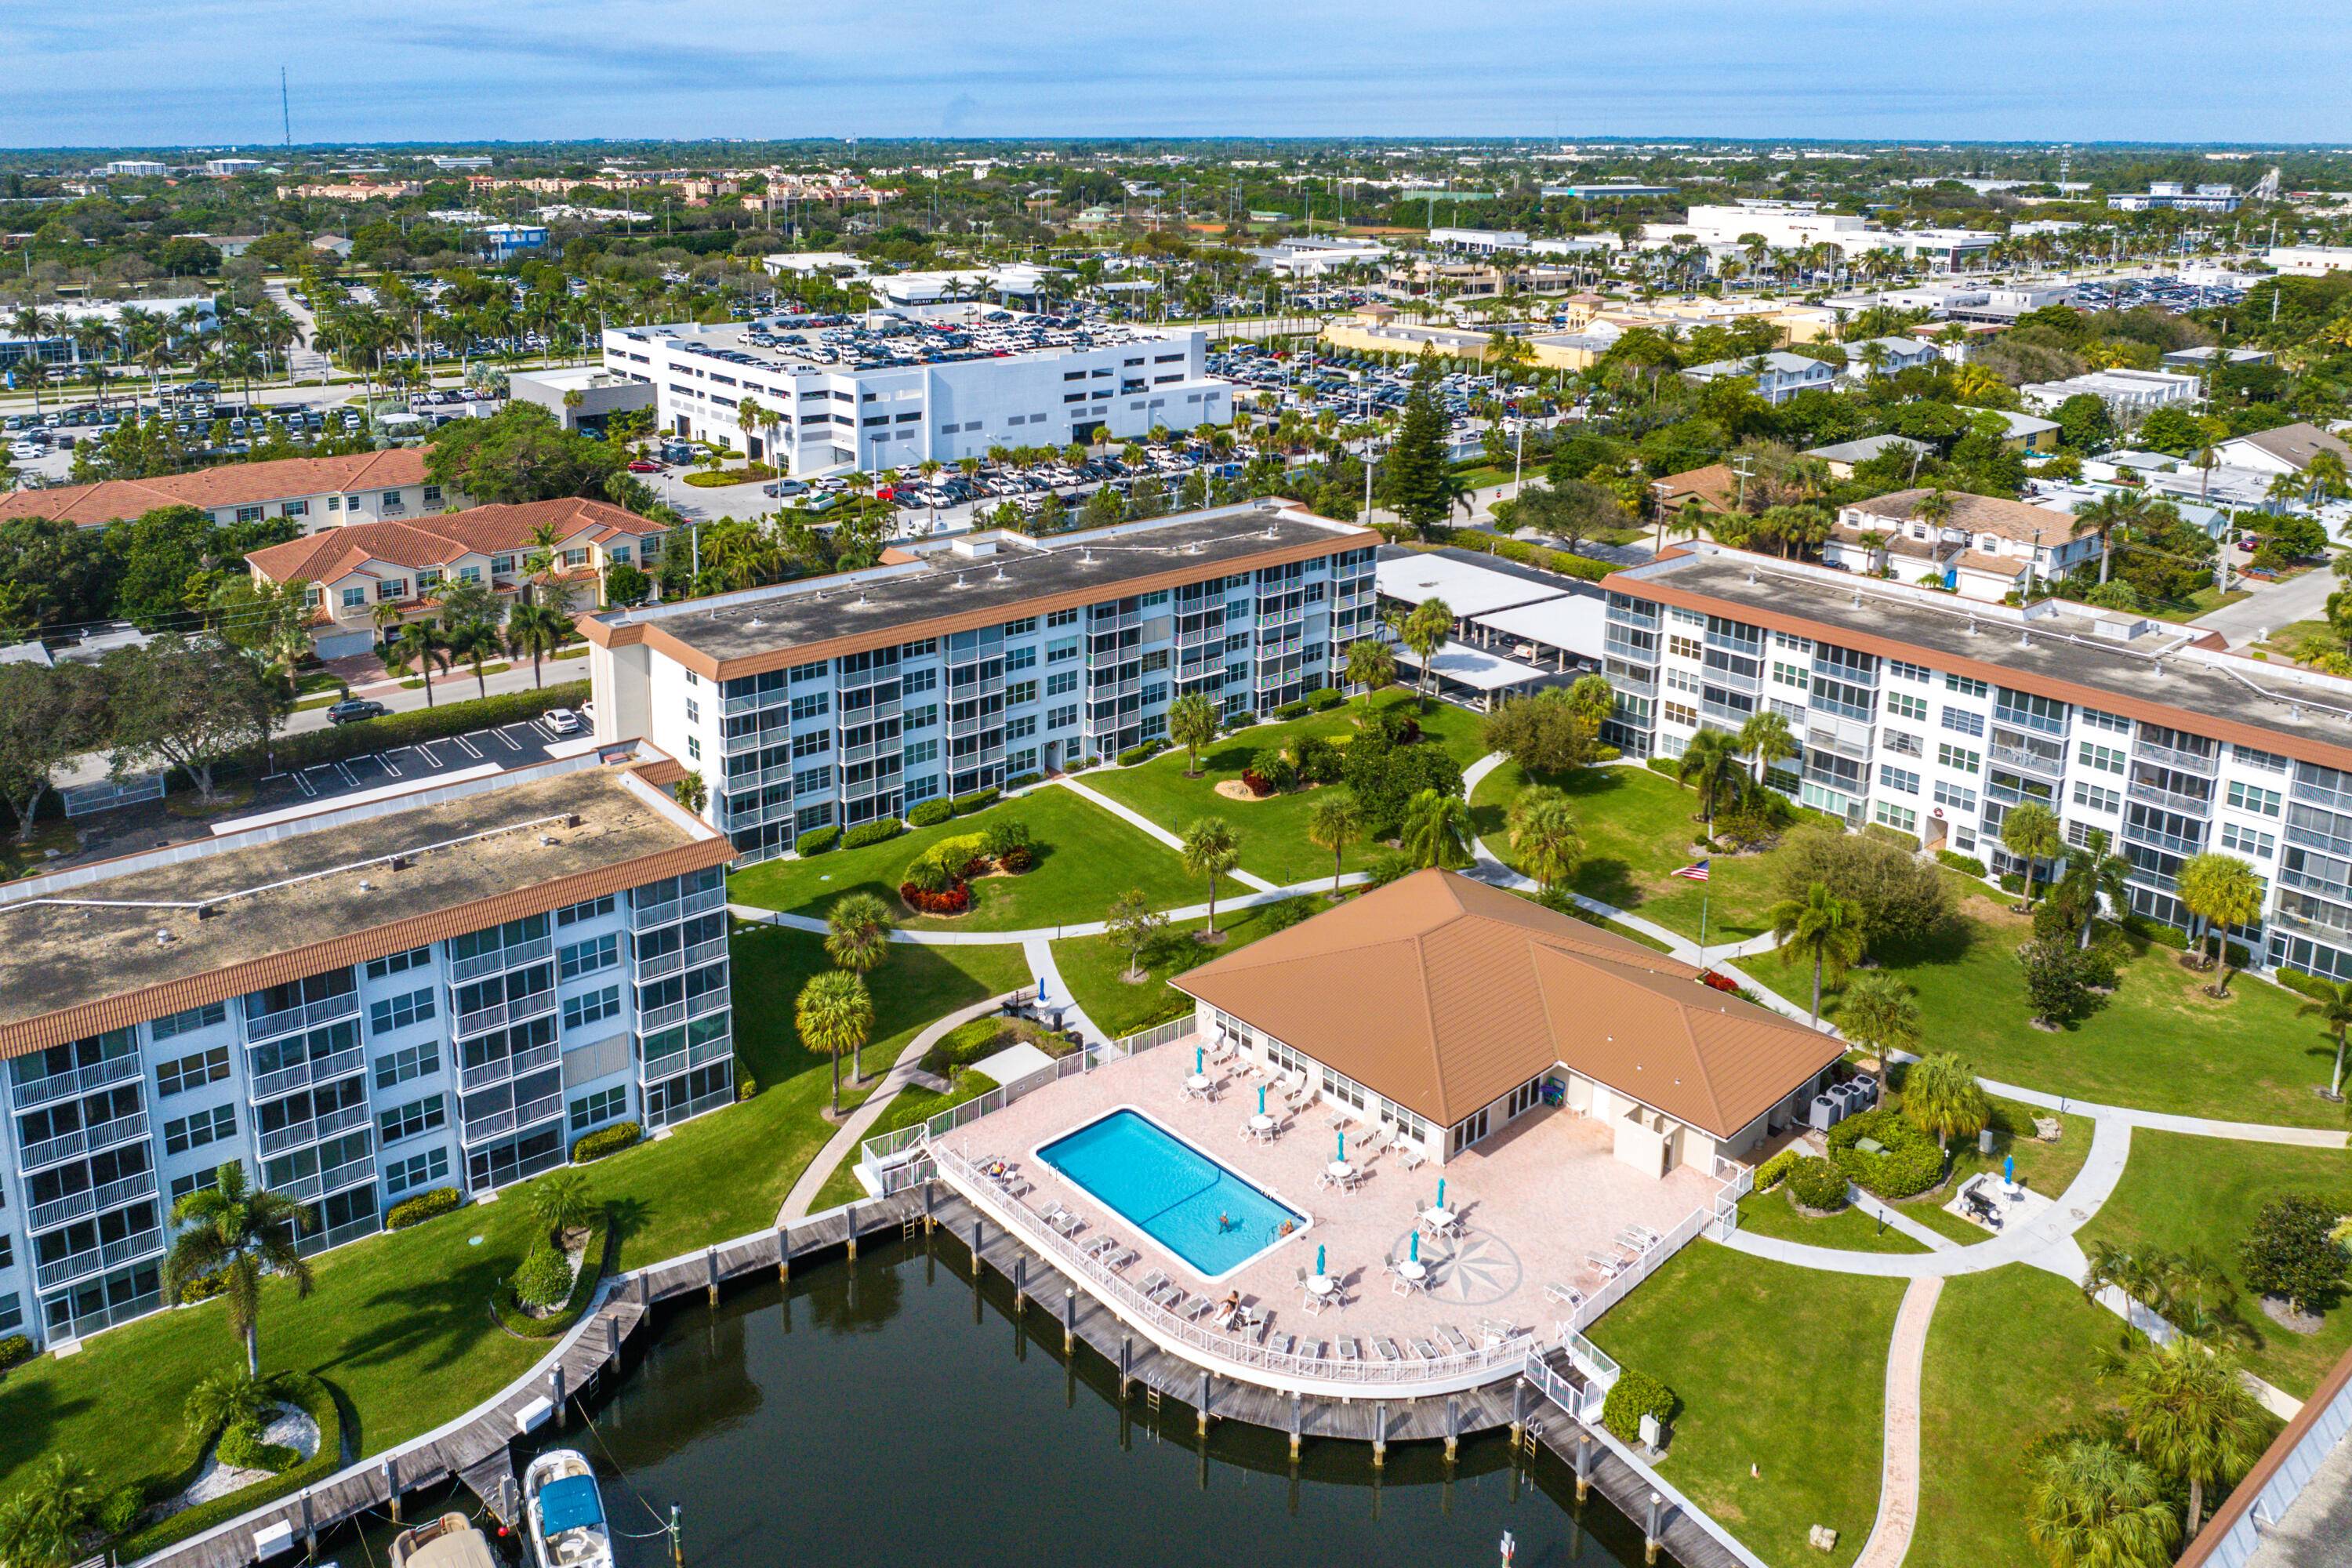 Delray Beach is Southern Livings 1 best towns for retirement.